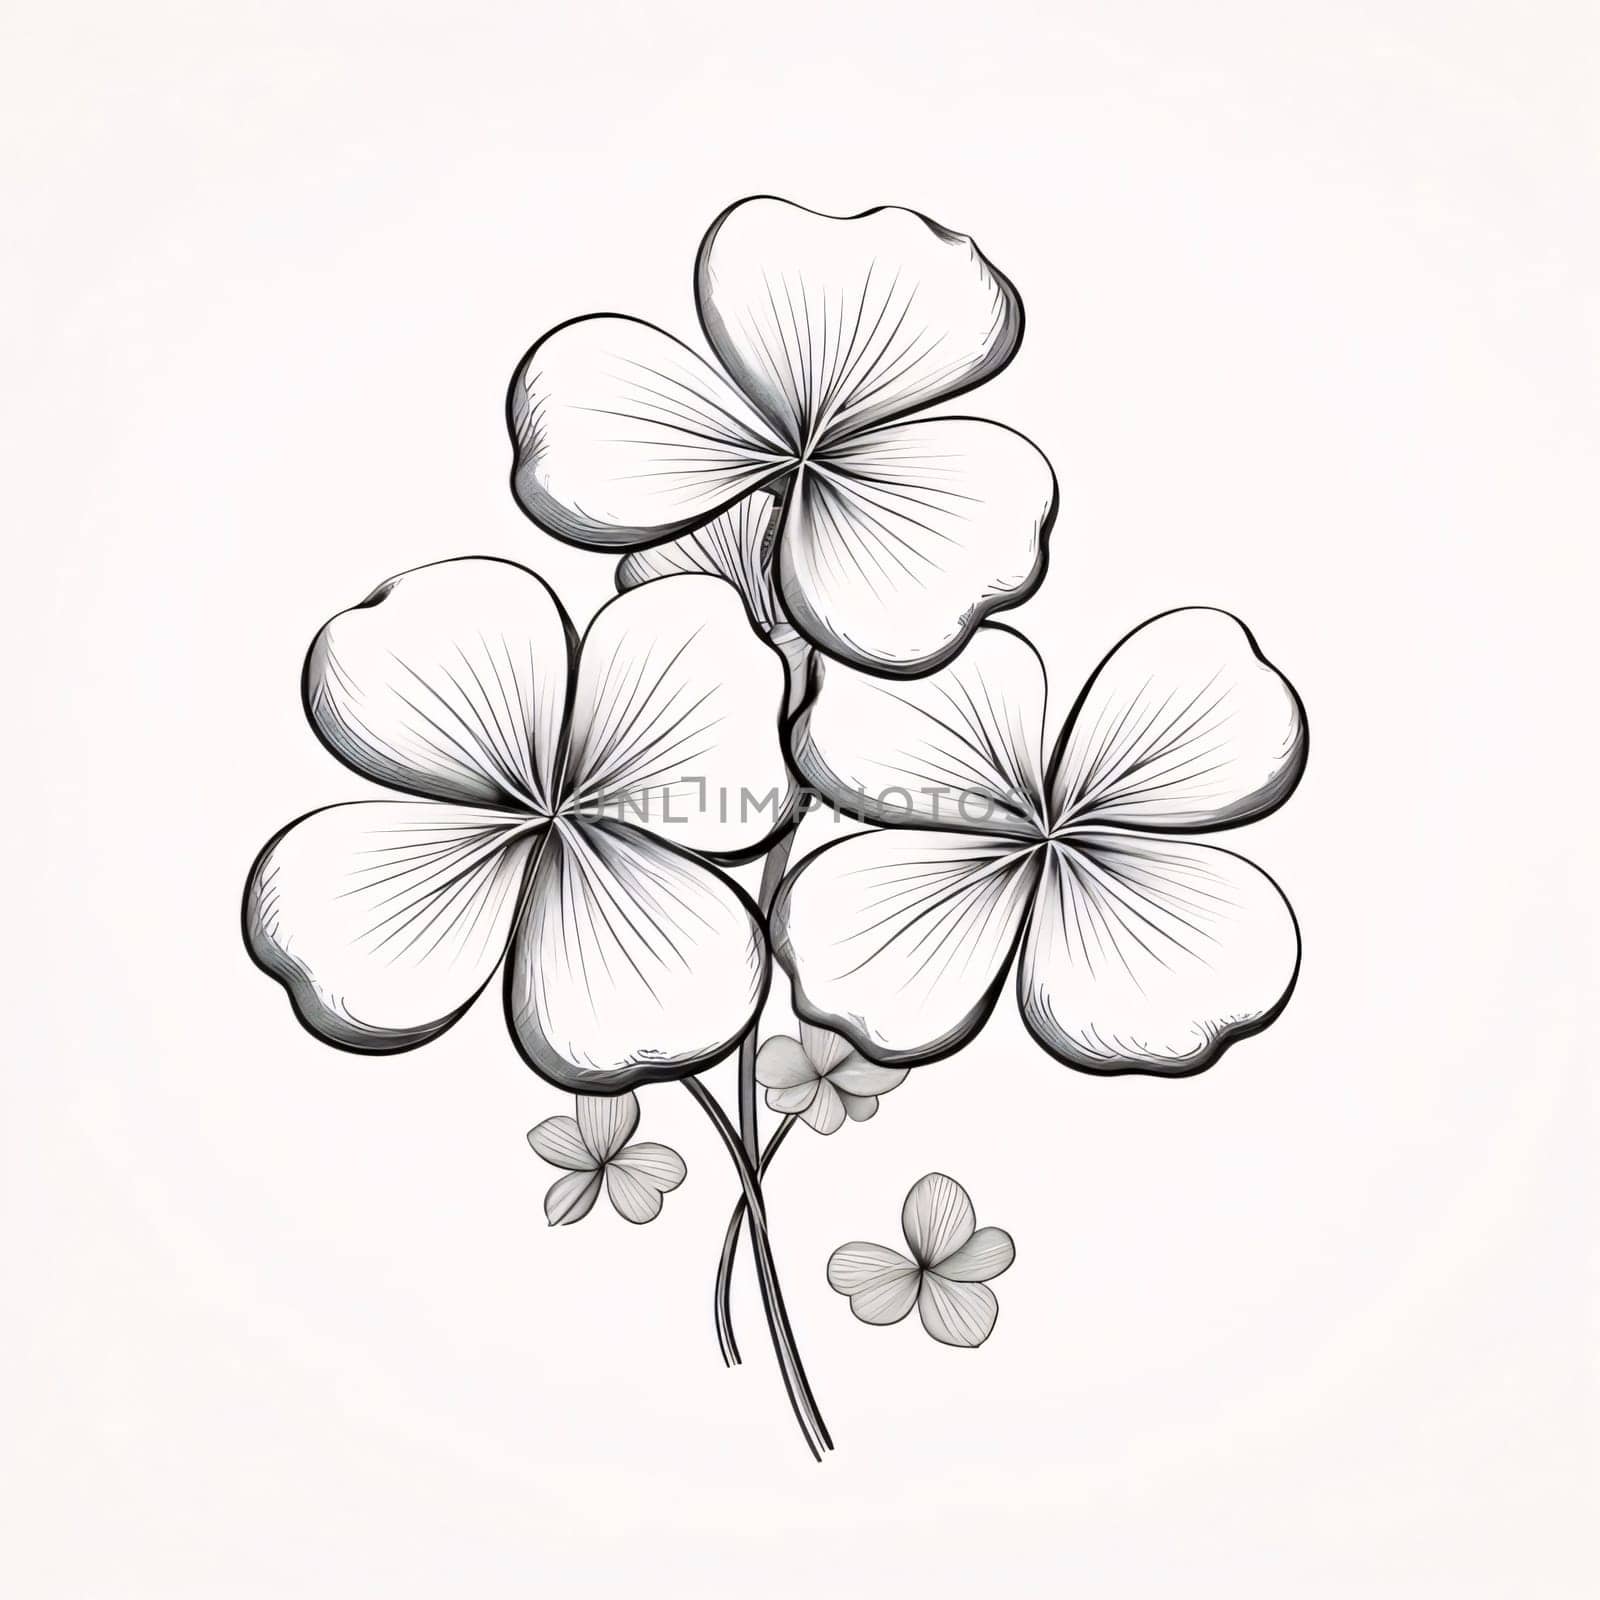 Black and white coloring sheet, four-leaf clover. Green four-leaf clover symbol of St. Patrick's Day. by ThemesS